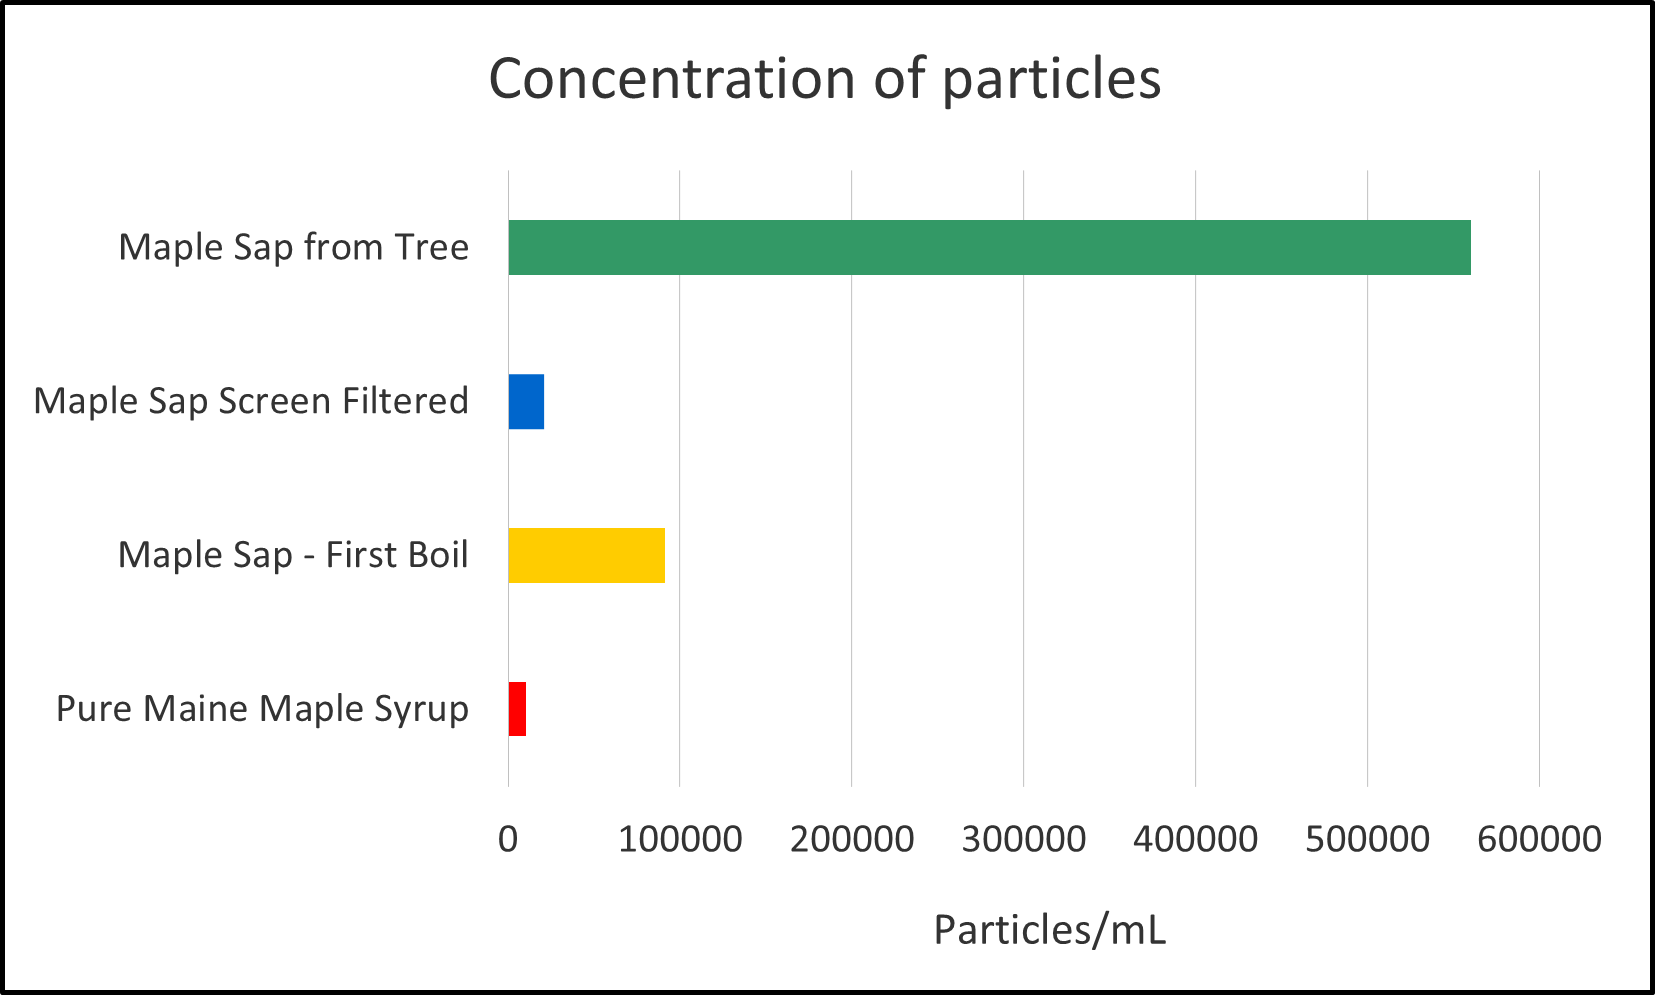 Graphs showing concentration of particles